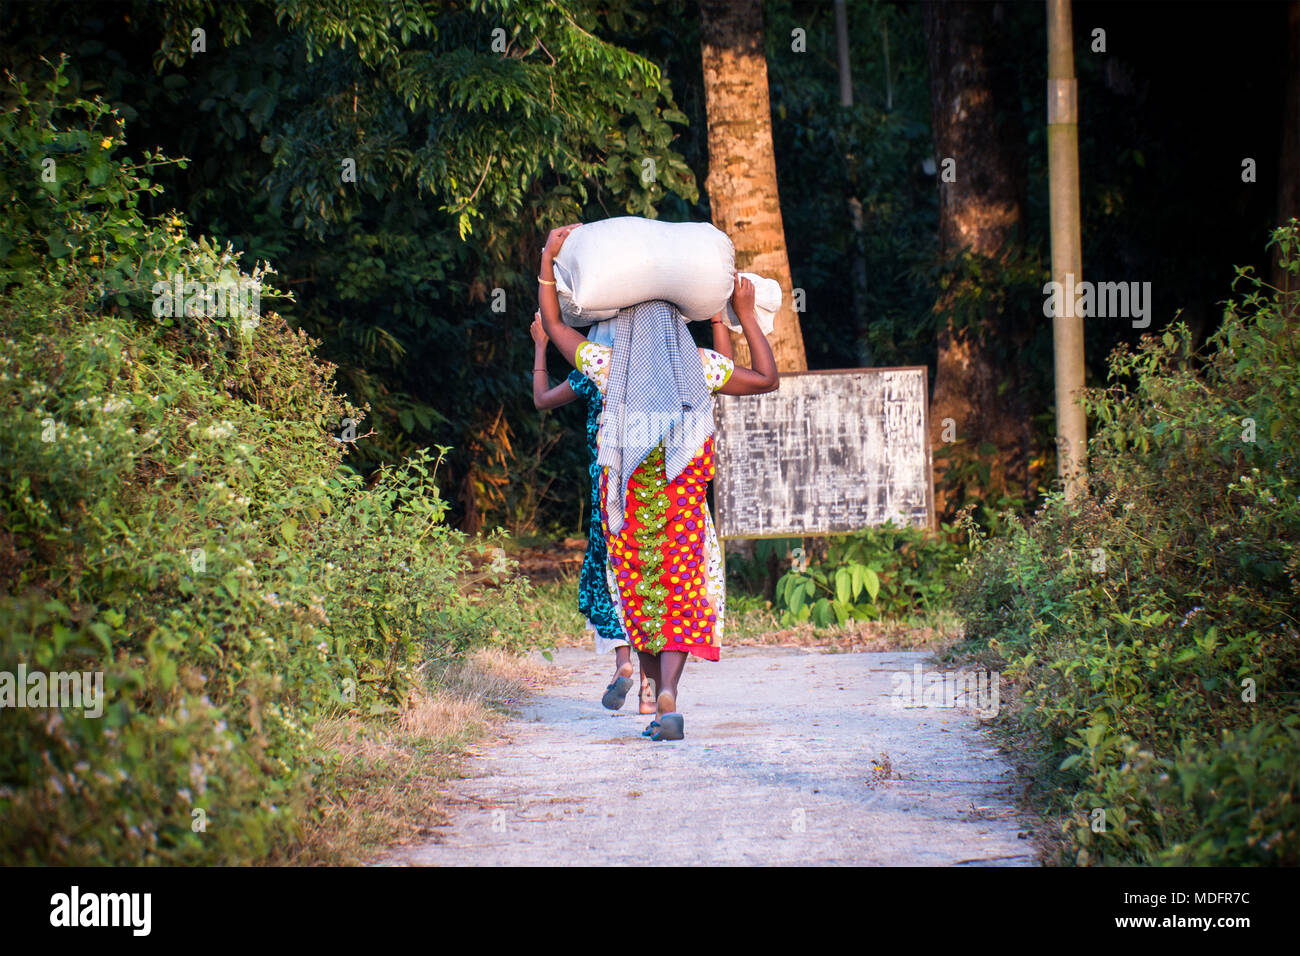 Indian woman carrying a bundle on her head. Indian girls are carrying two big bags on their head on the road in the jungle forest. Stock Photo